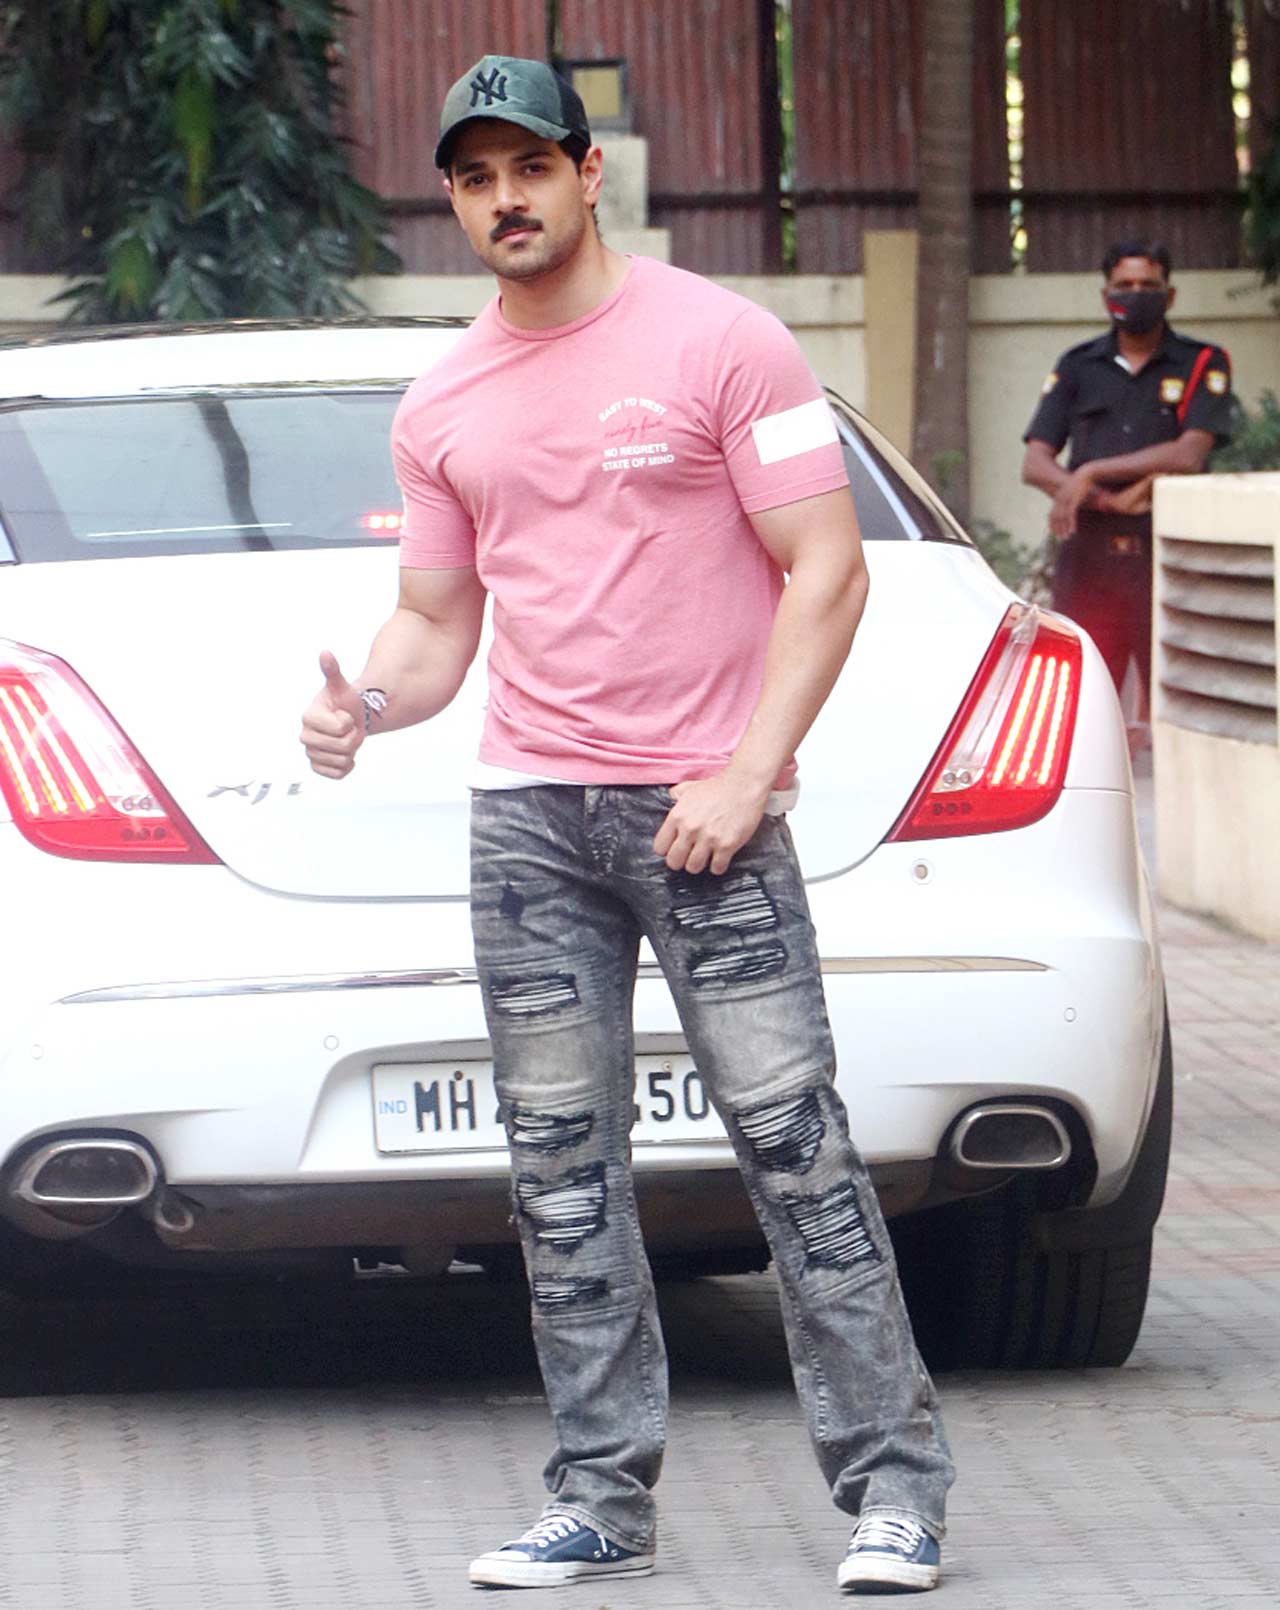 Sooraj Pancholi showed off his handsomeness in his pink t-shirt and light grey pants as he was clicked in Mumbai.